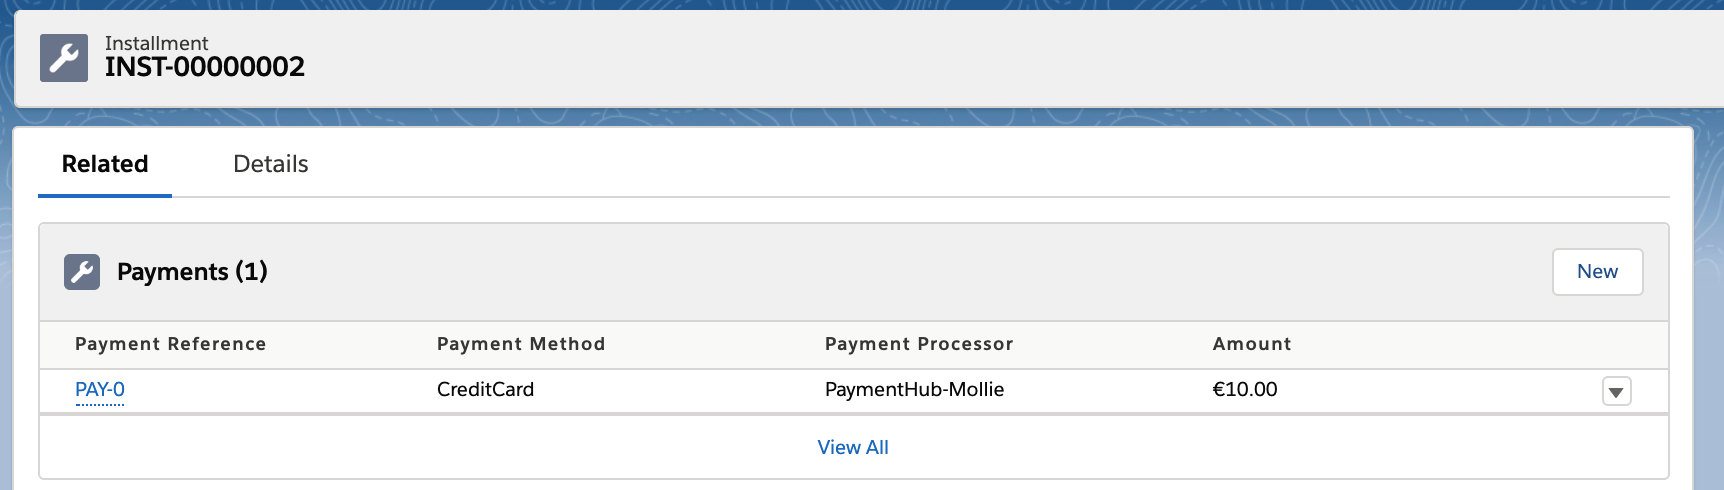 Payment API_payment_installment_payment record